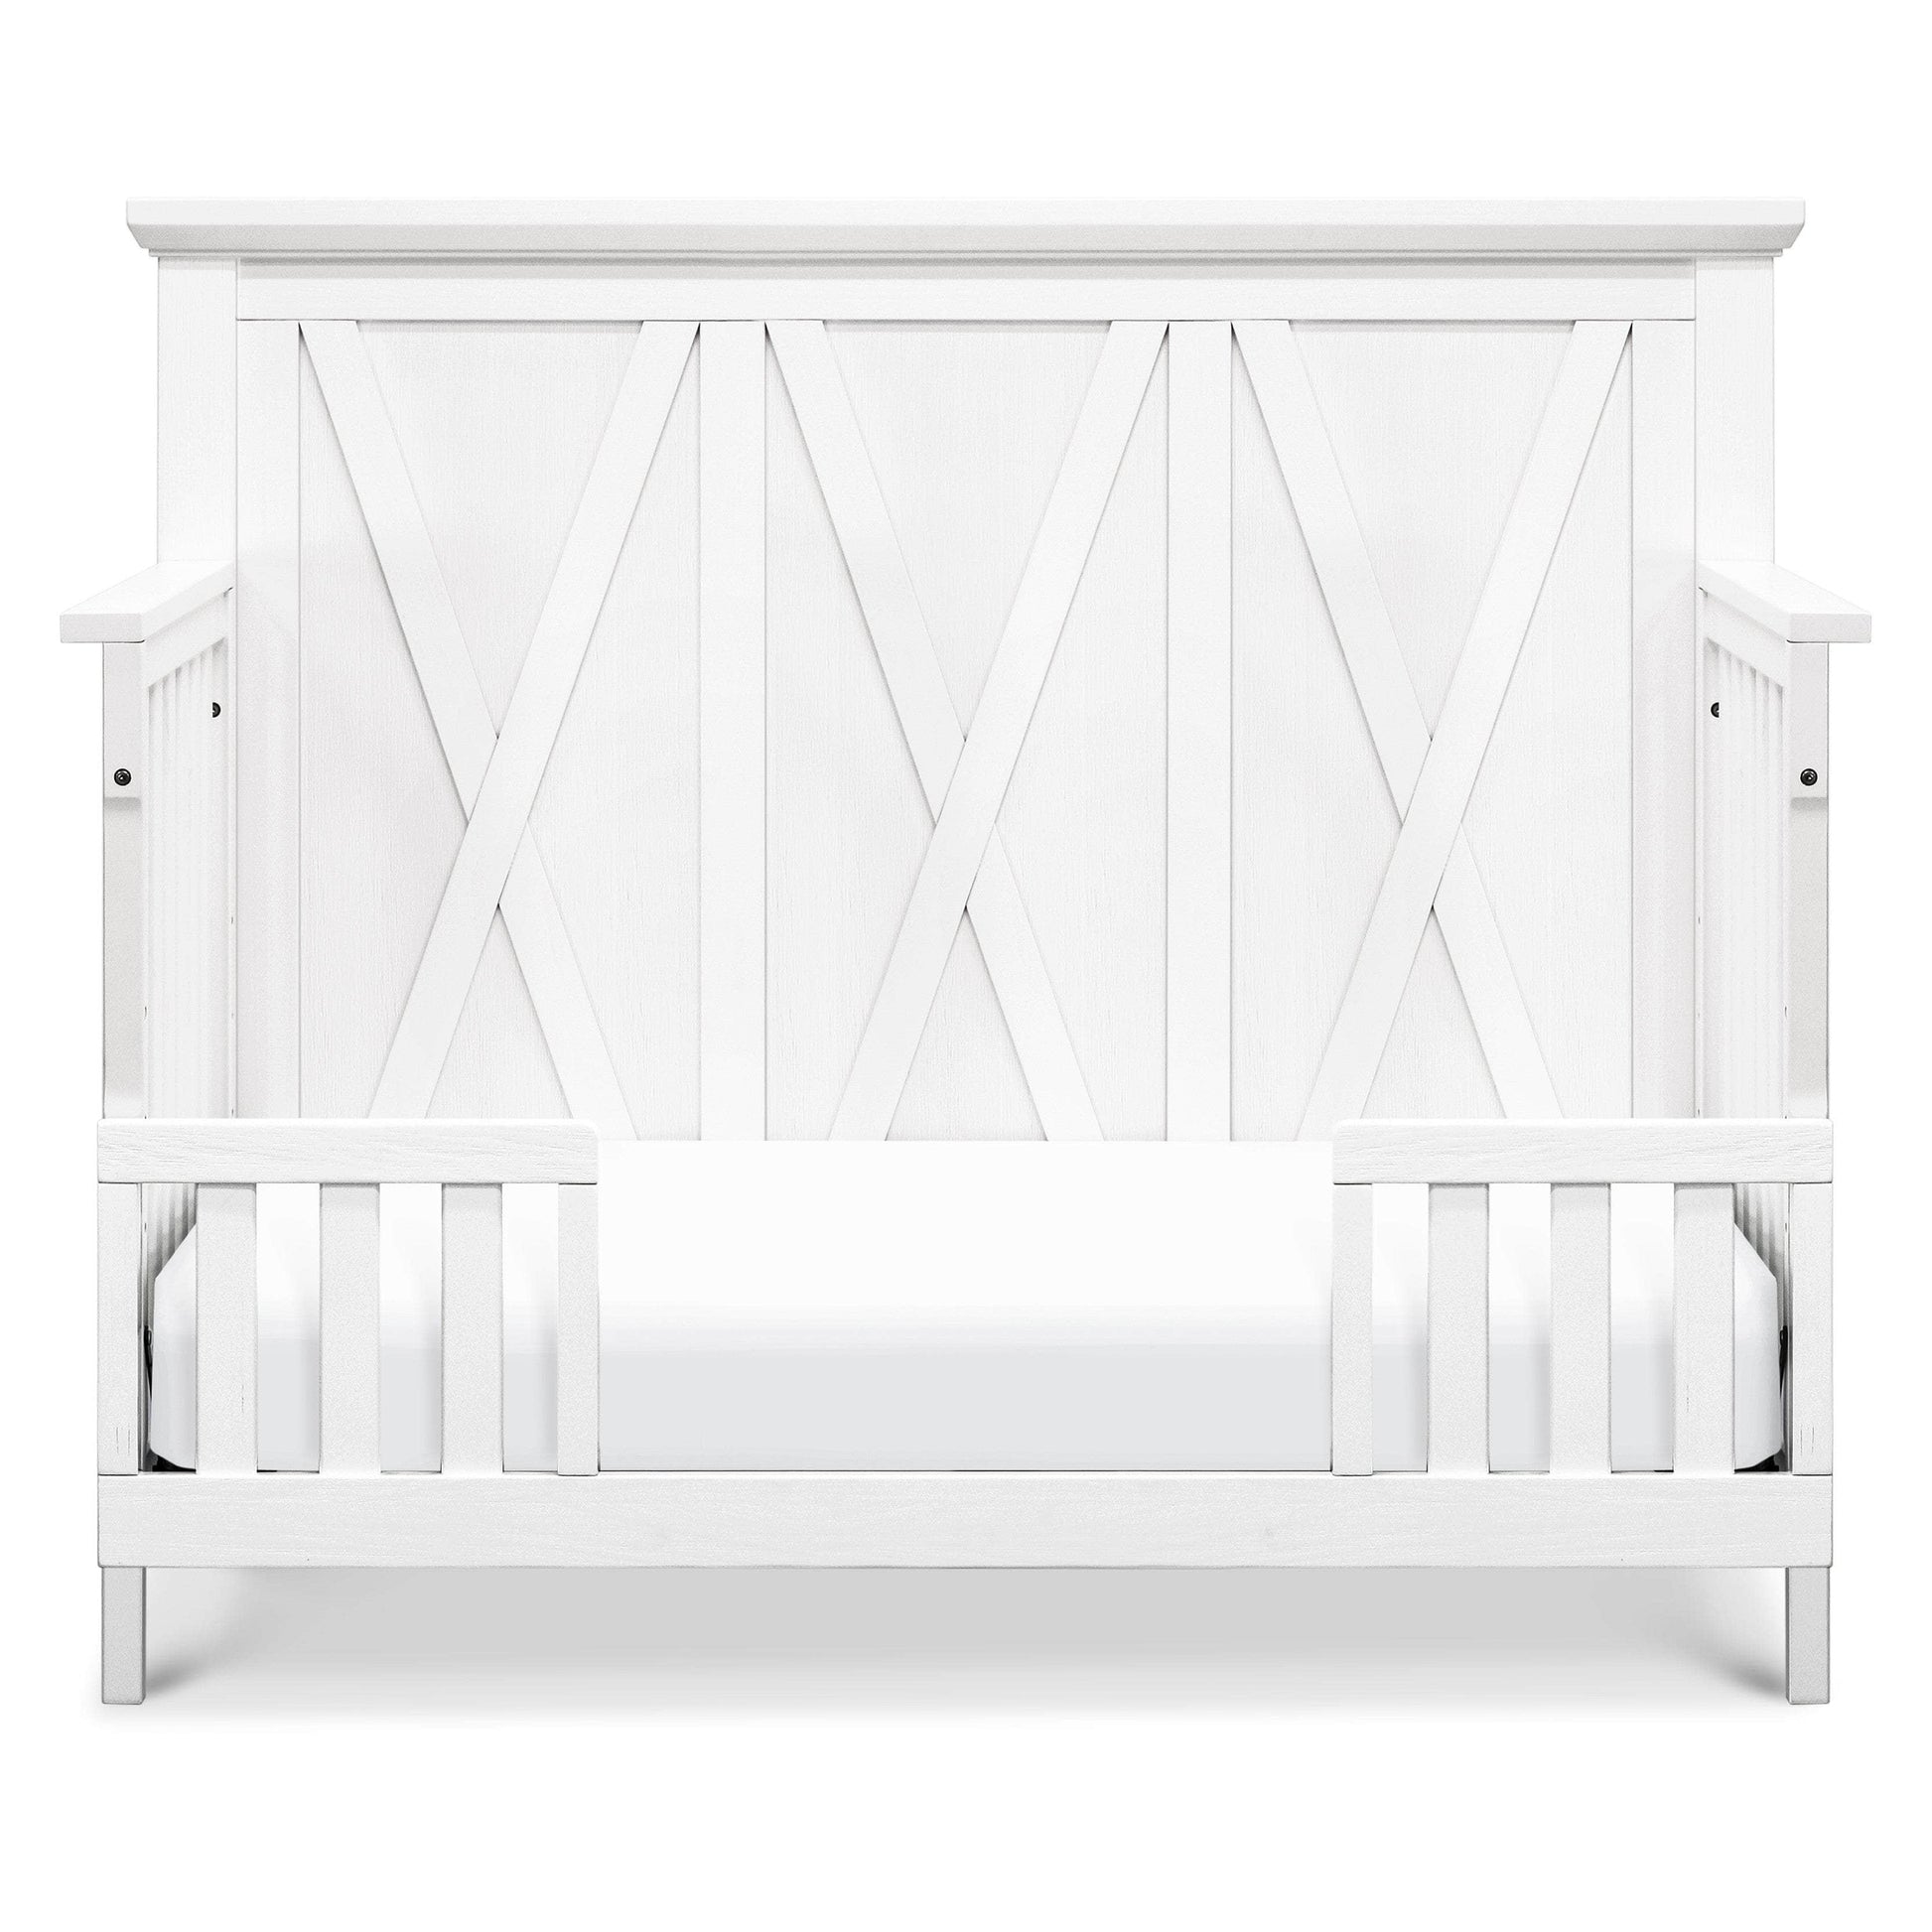 B14501LW,Emory Farmhouse 4-in-1 Convertible Crib in Linen White